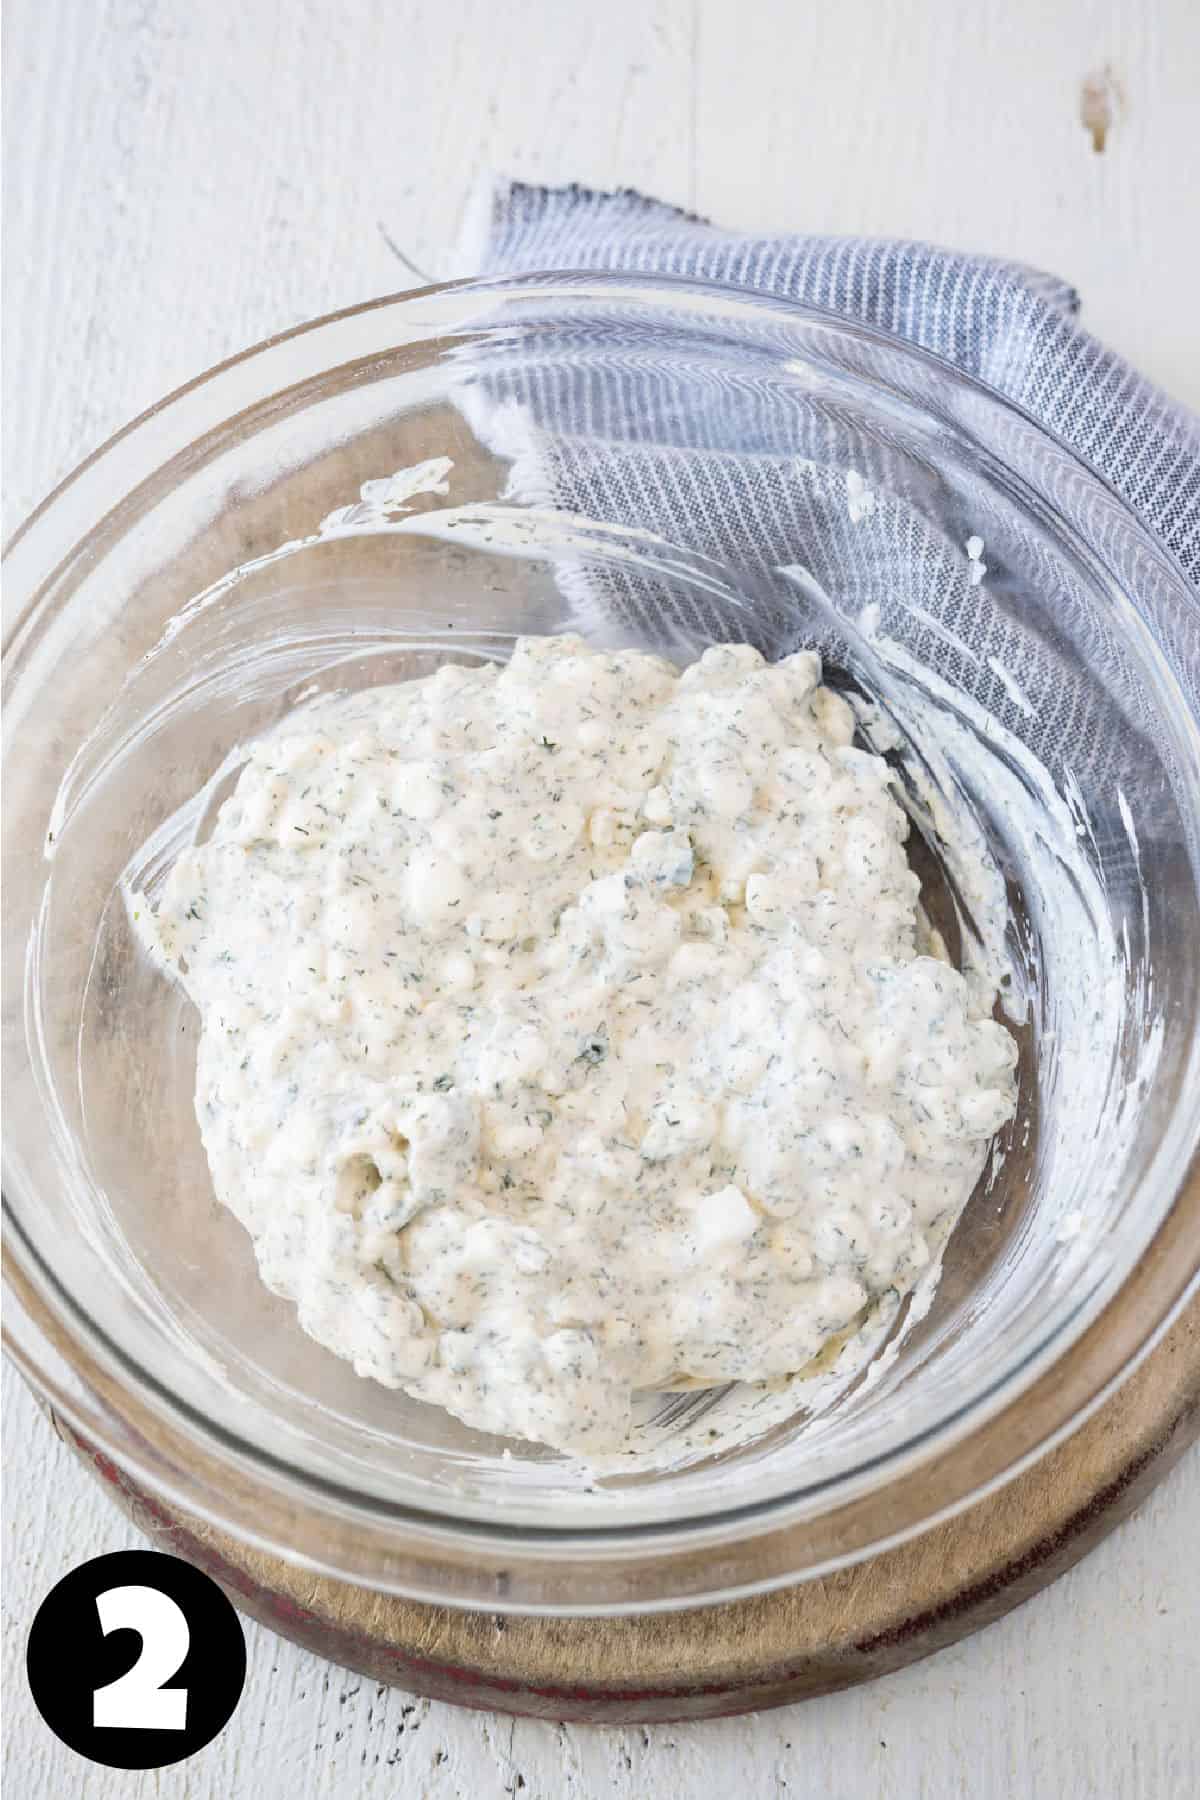 Mixed dill dip in a glass bowl.